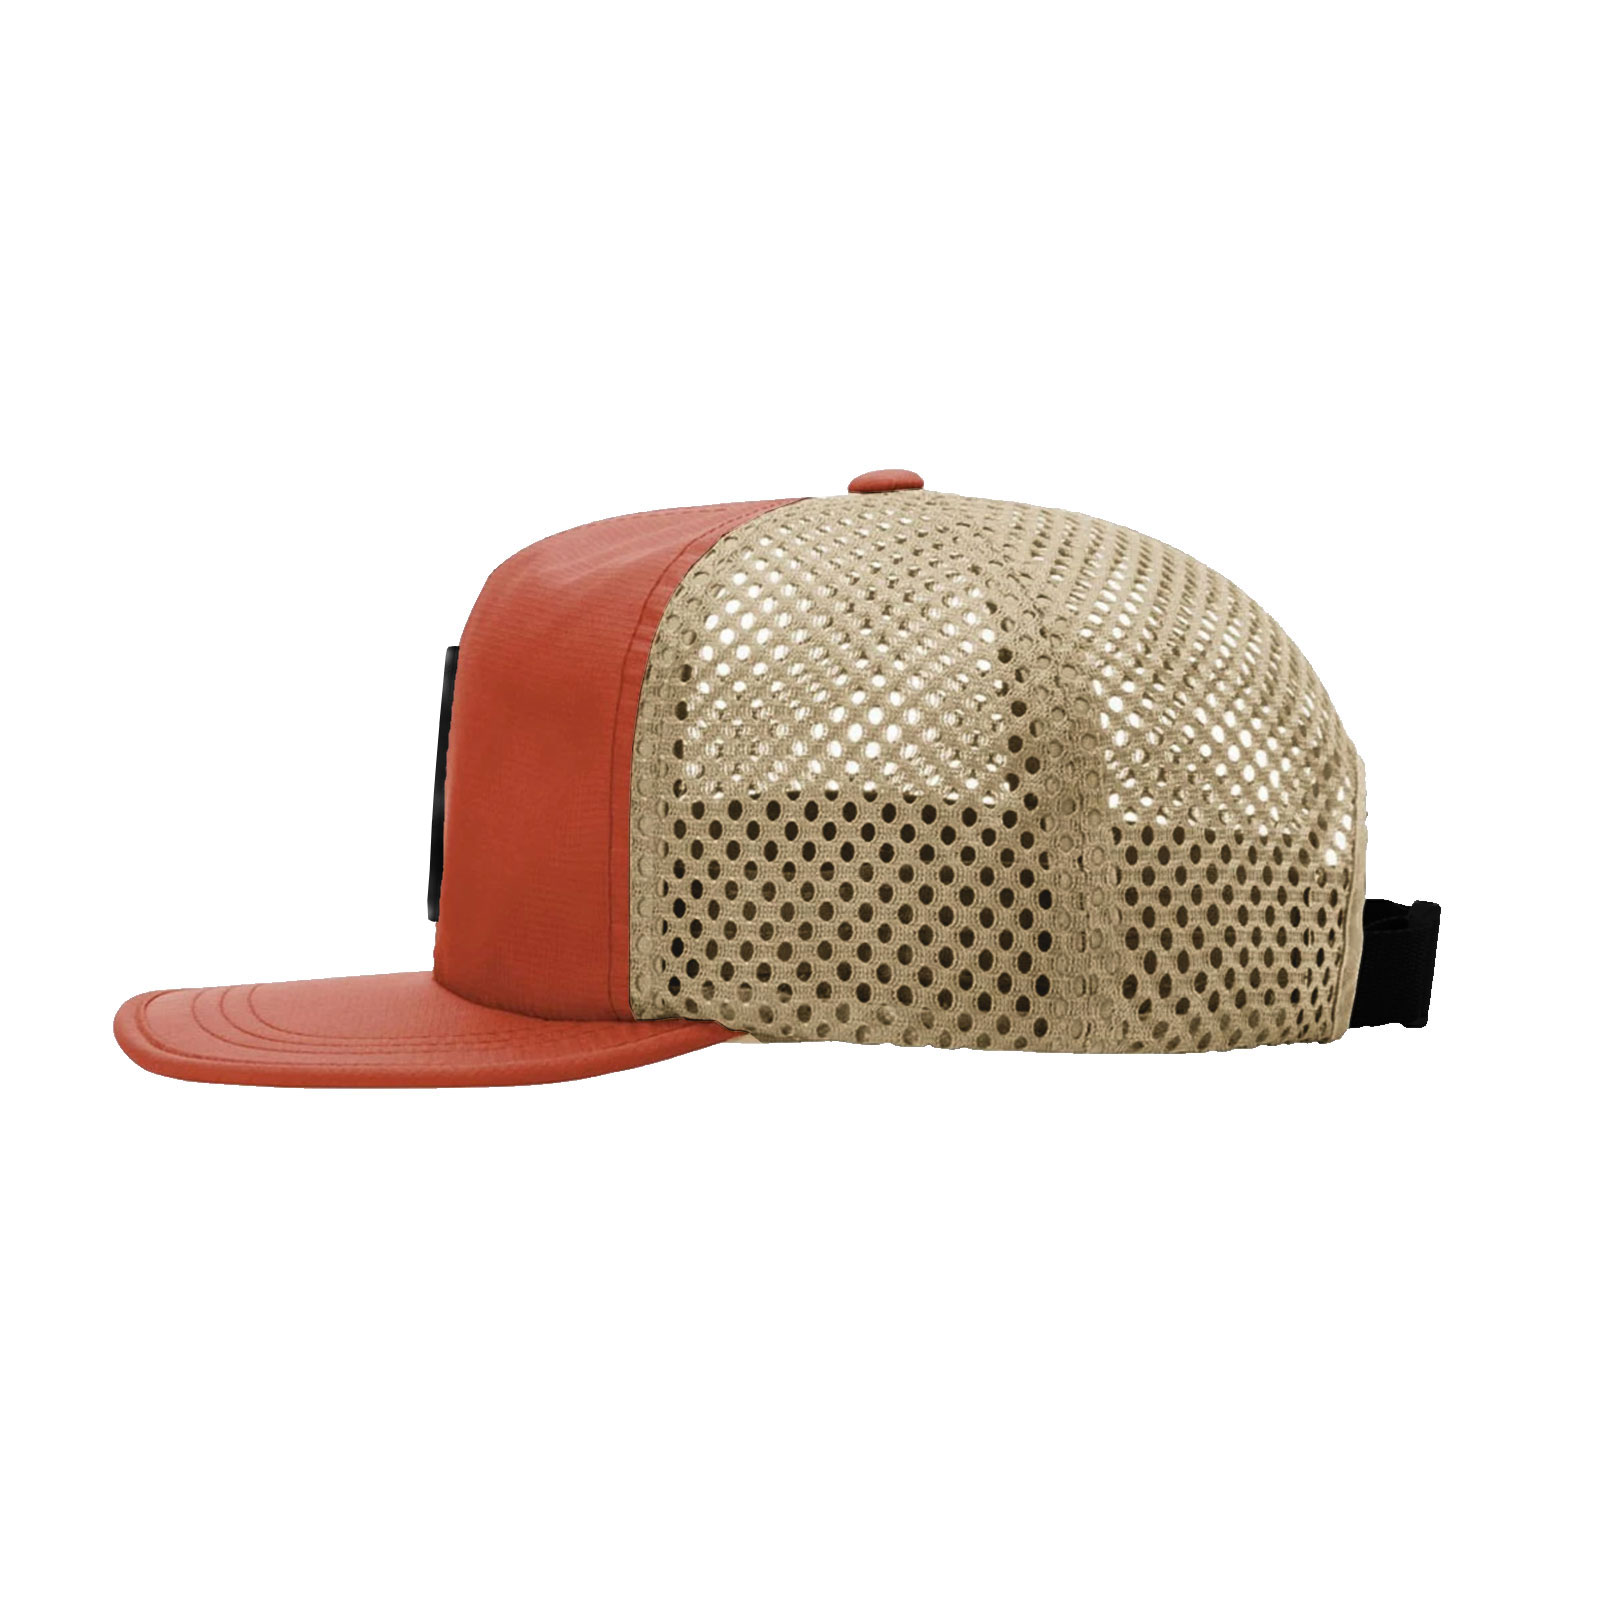 BASS SQUARE HAT - 935 ROGUE